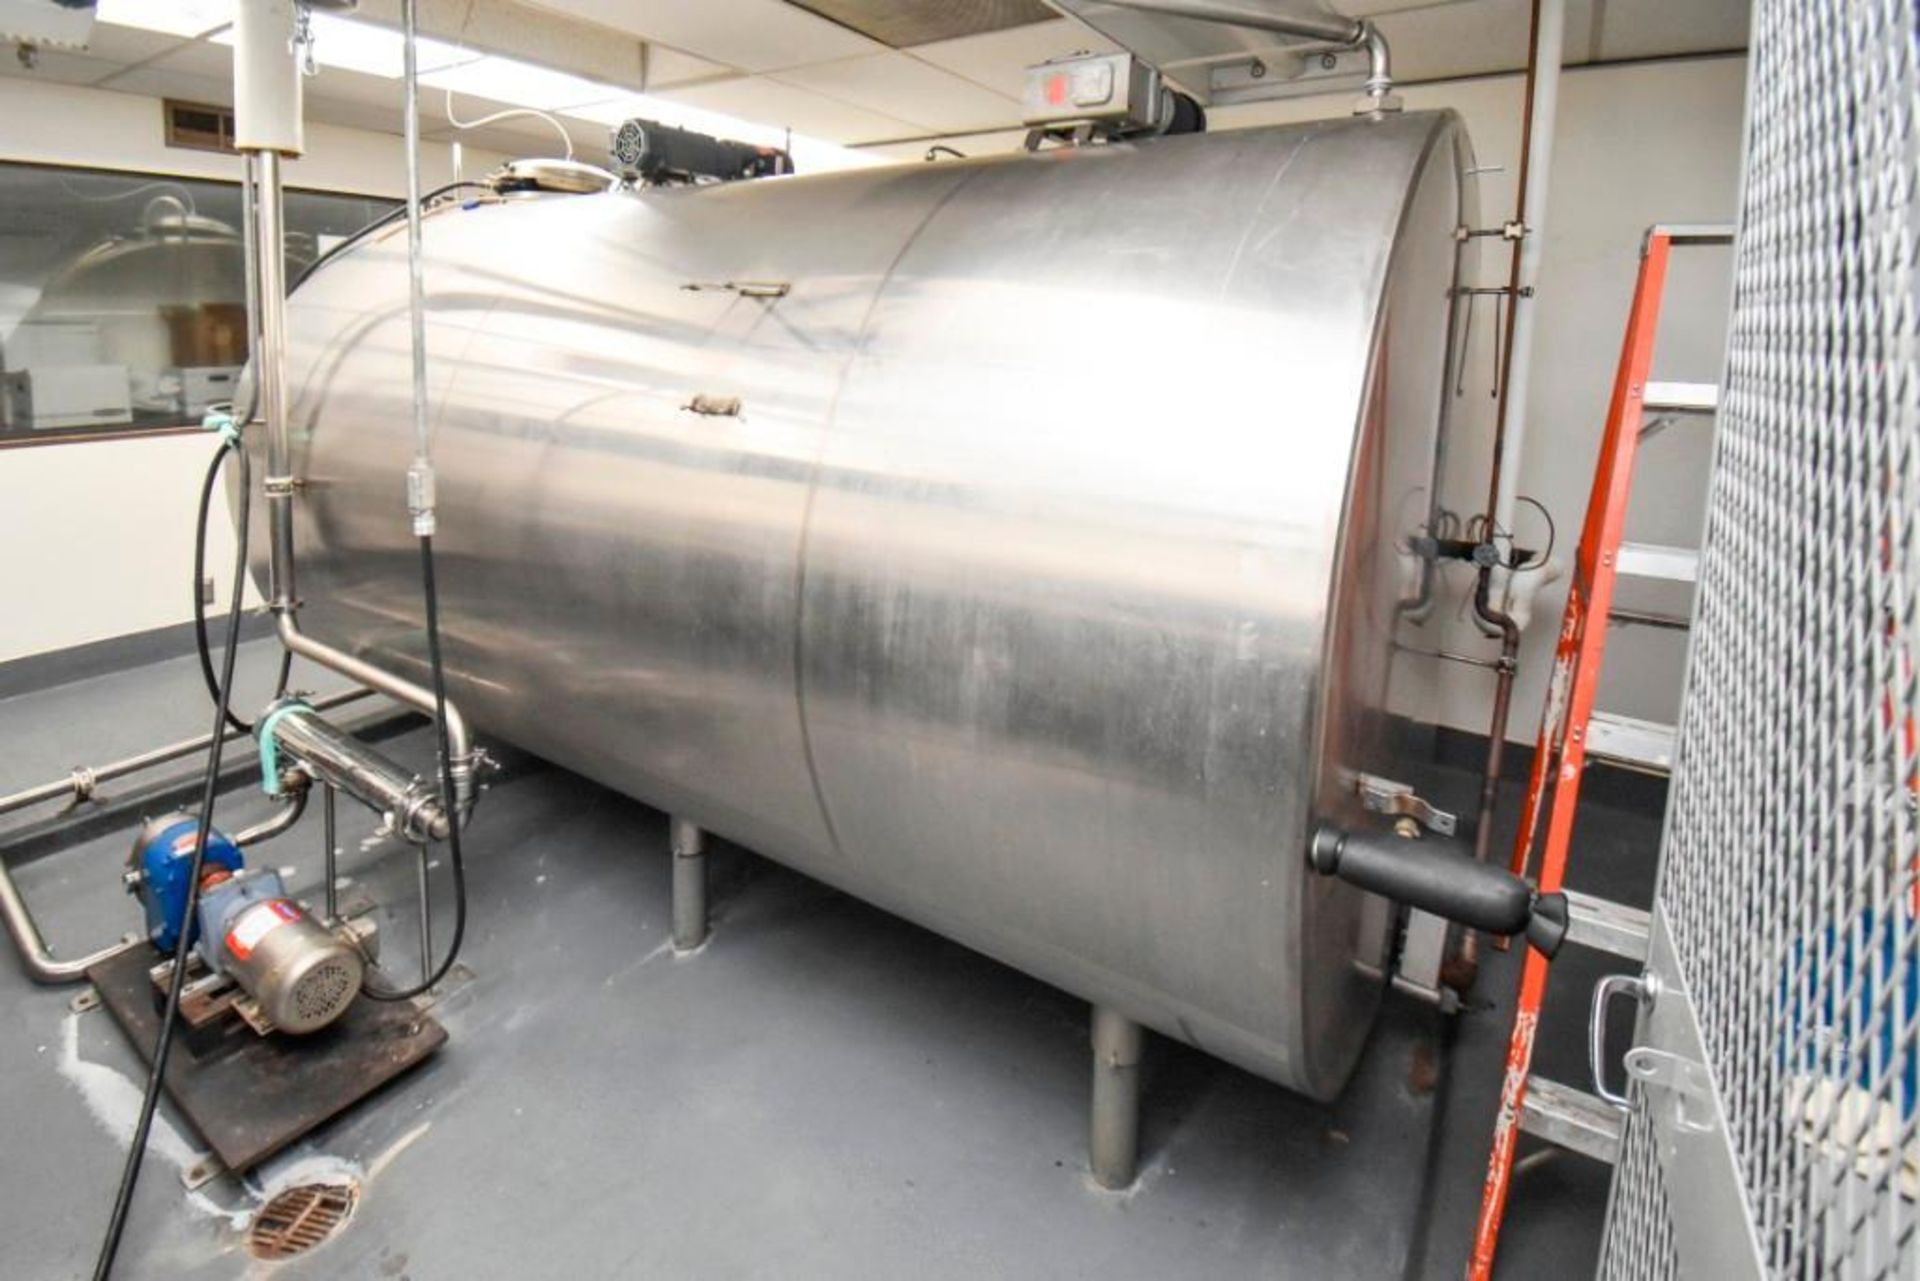 Schweitzer's 2000 Gallon Tank with Freon Cooling System - Image 2 of 5